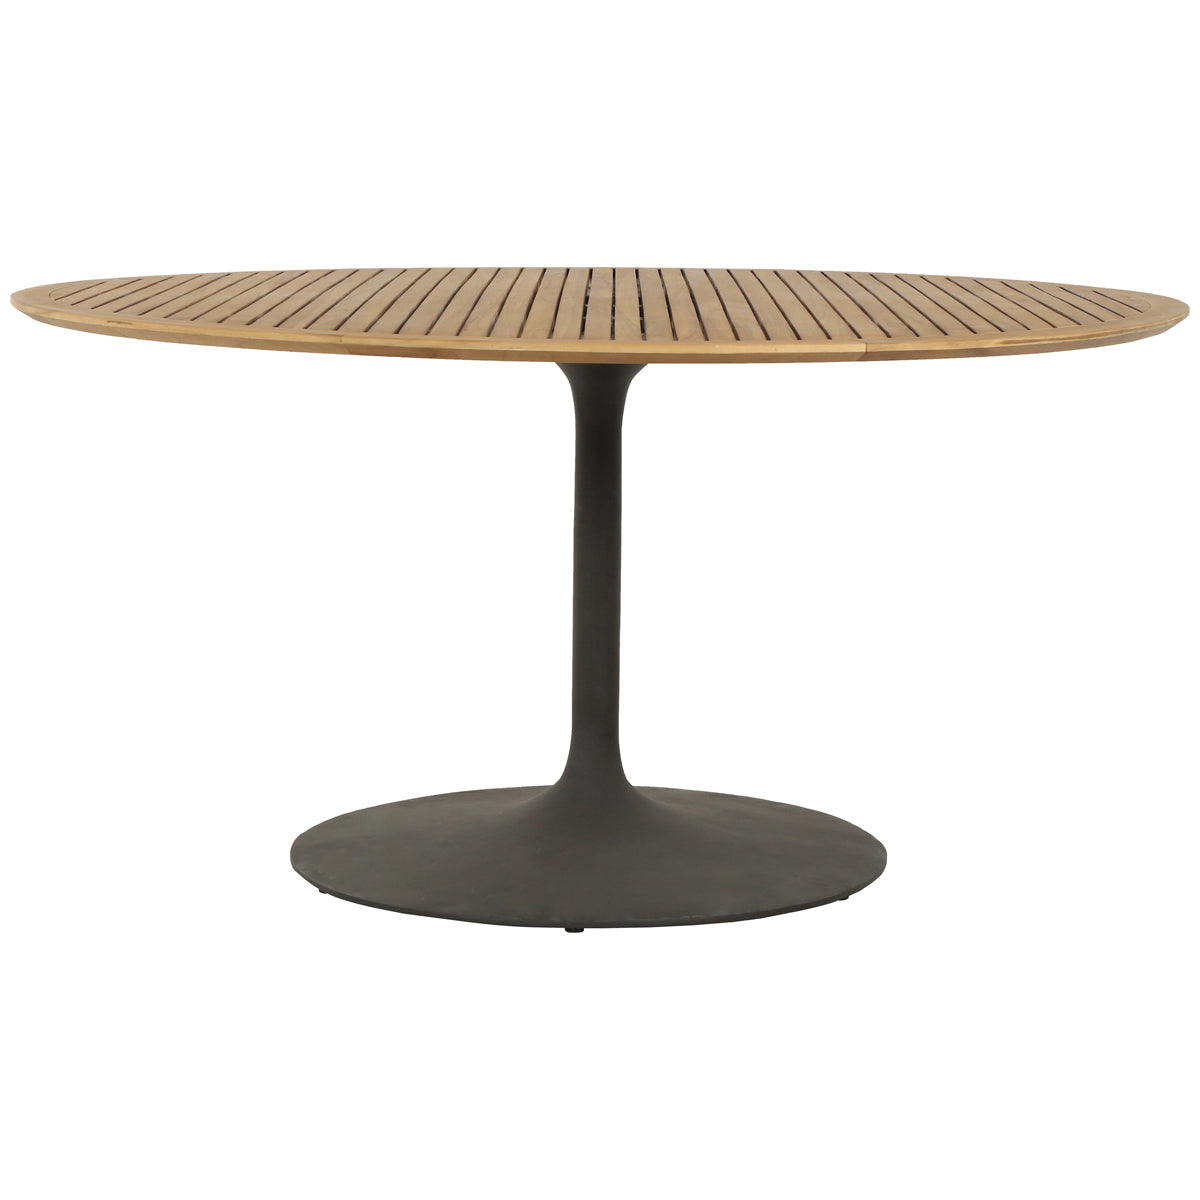 Four Hands Solano Reina Outdoor Dining Table